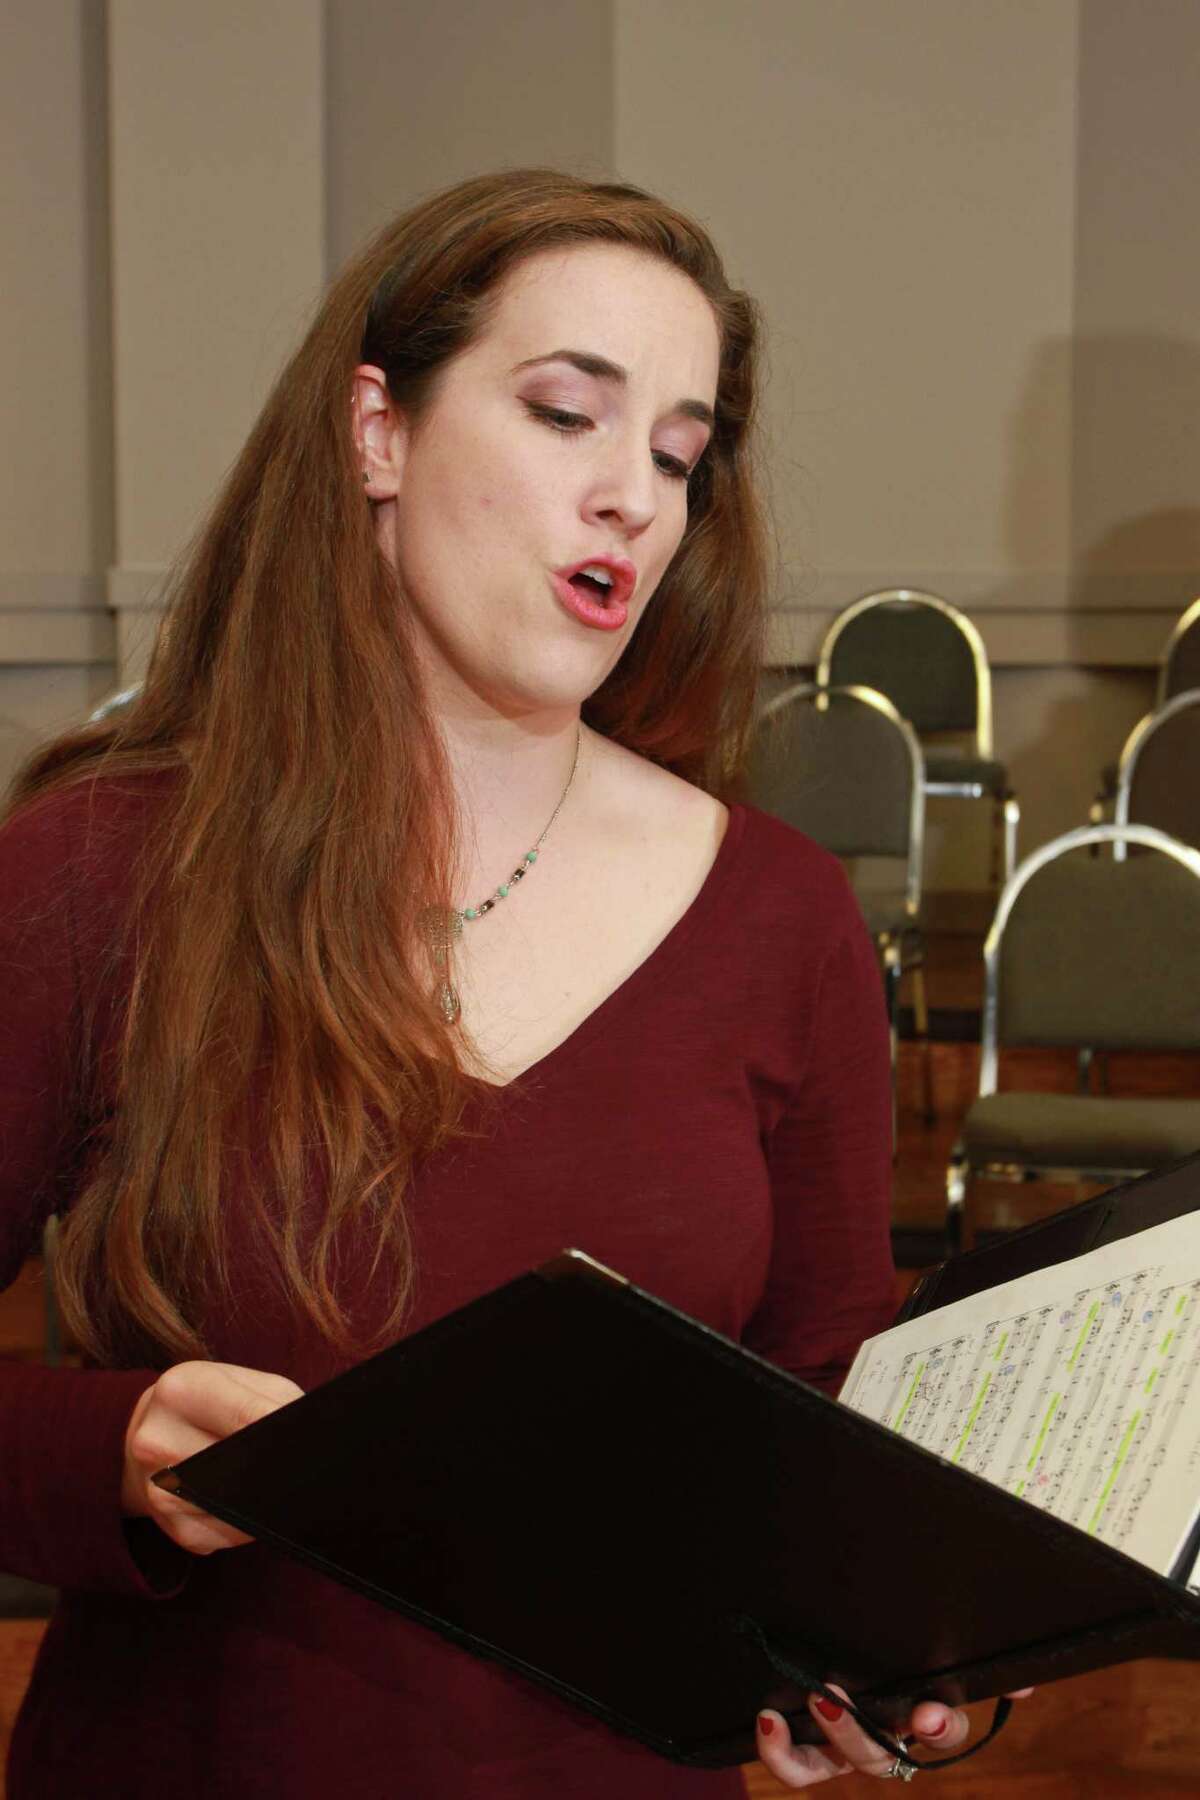 Mezzo-soprano Sarah Mesko will perform Johann Christian Friedrich Bach's "The American Girl" in Ars Lyrica's "Bach and Sons: At the Cafe."